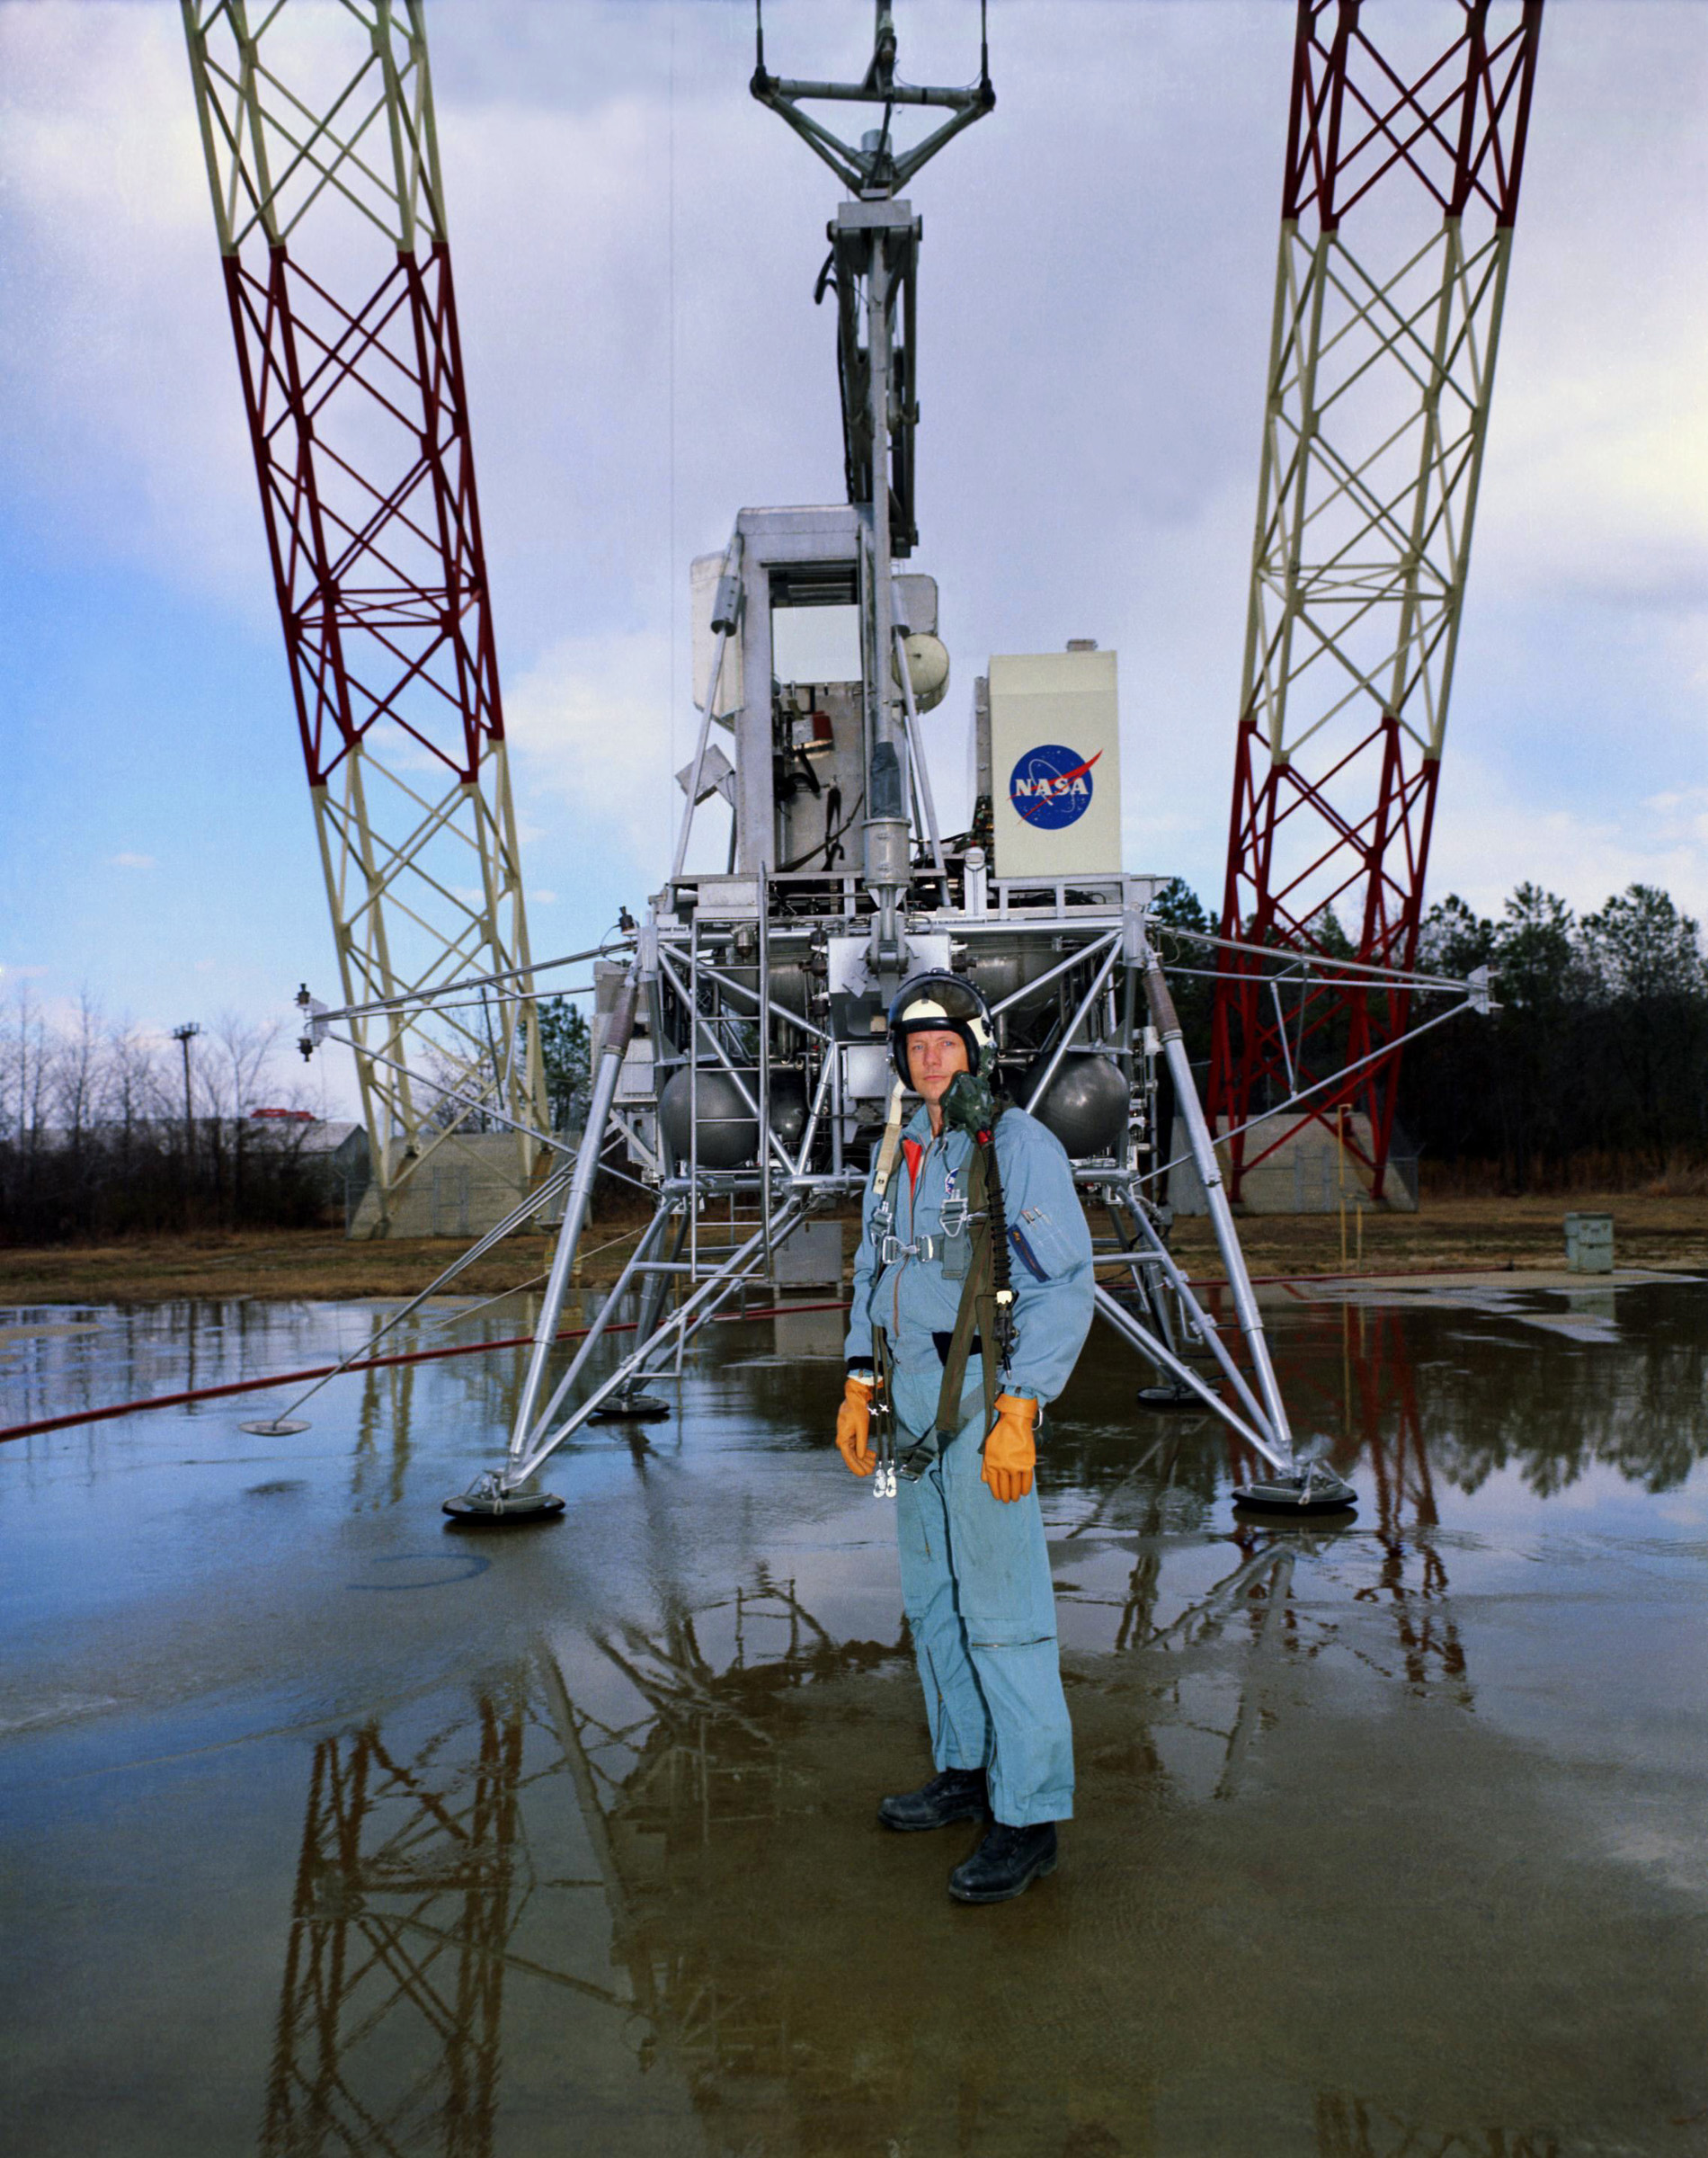 Neil A. Armstrong stands in front of the Lunar Module simulator at the Lunar Landing Research Facility (LLRF) at NASA's Langley Research Center in Hampton, Virginia